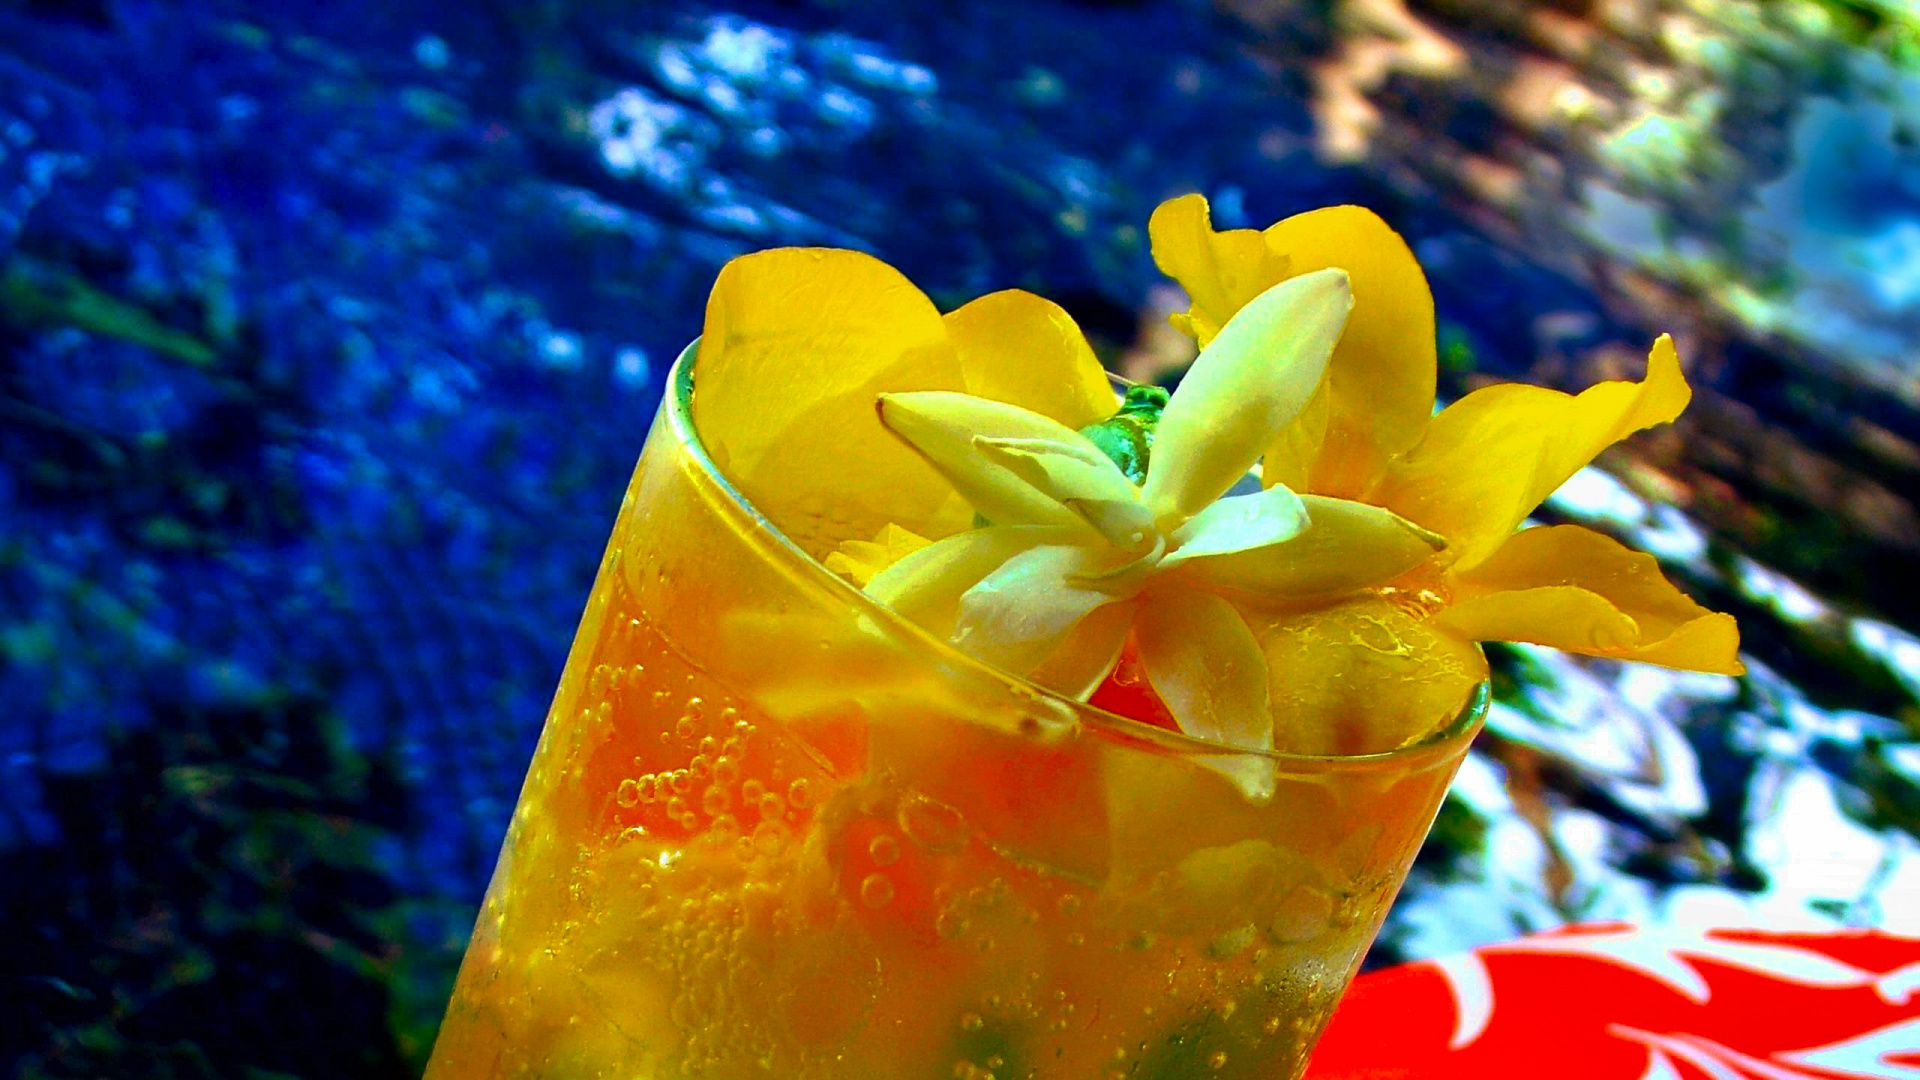 Clear Drinking Glass With Orange Juice. Wallpaper in 1920x1080 Resolution